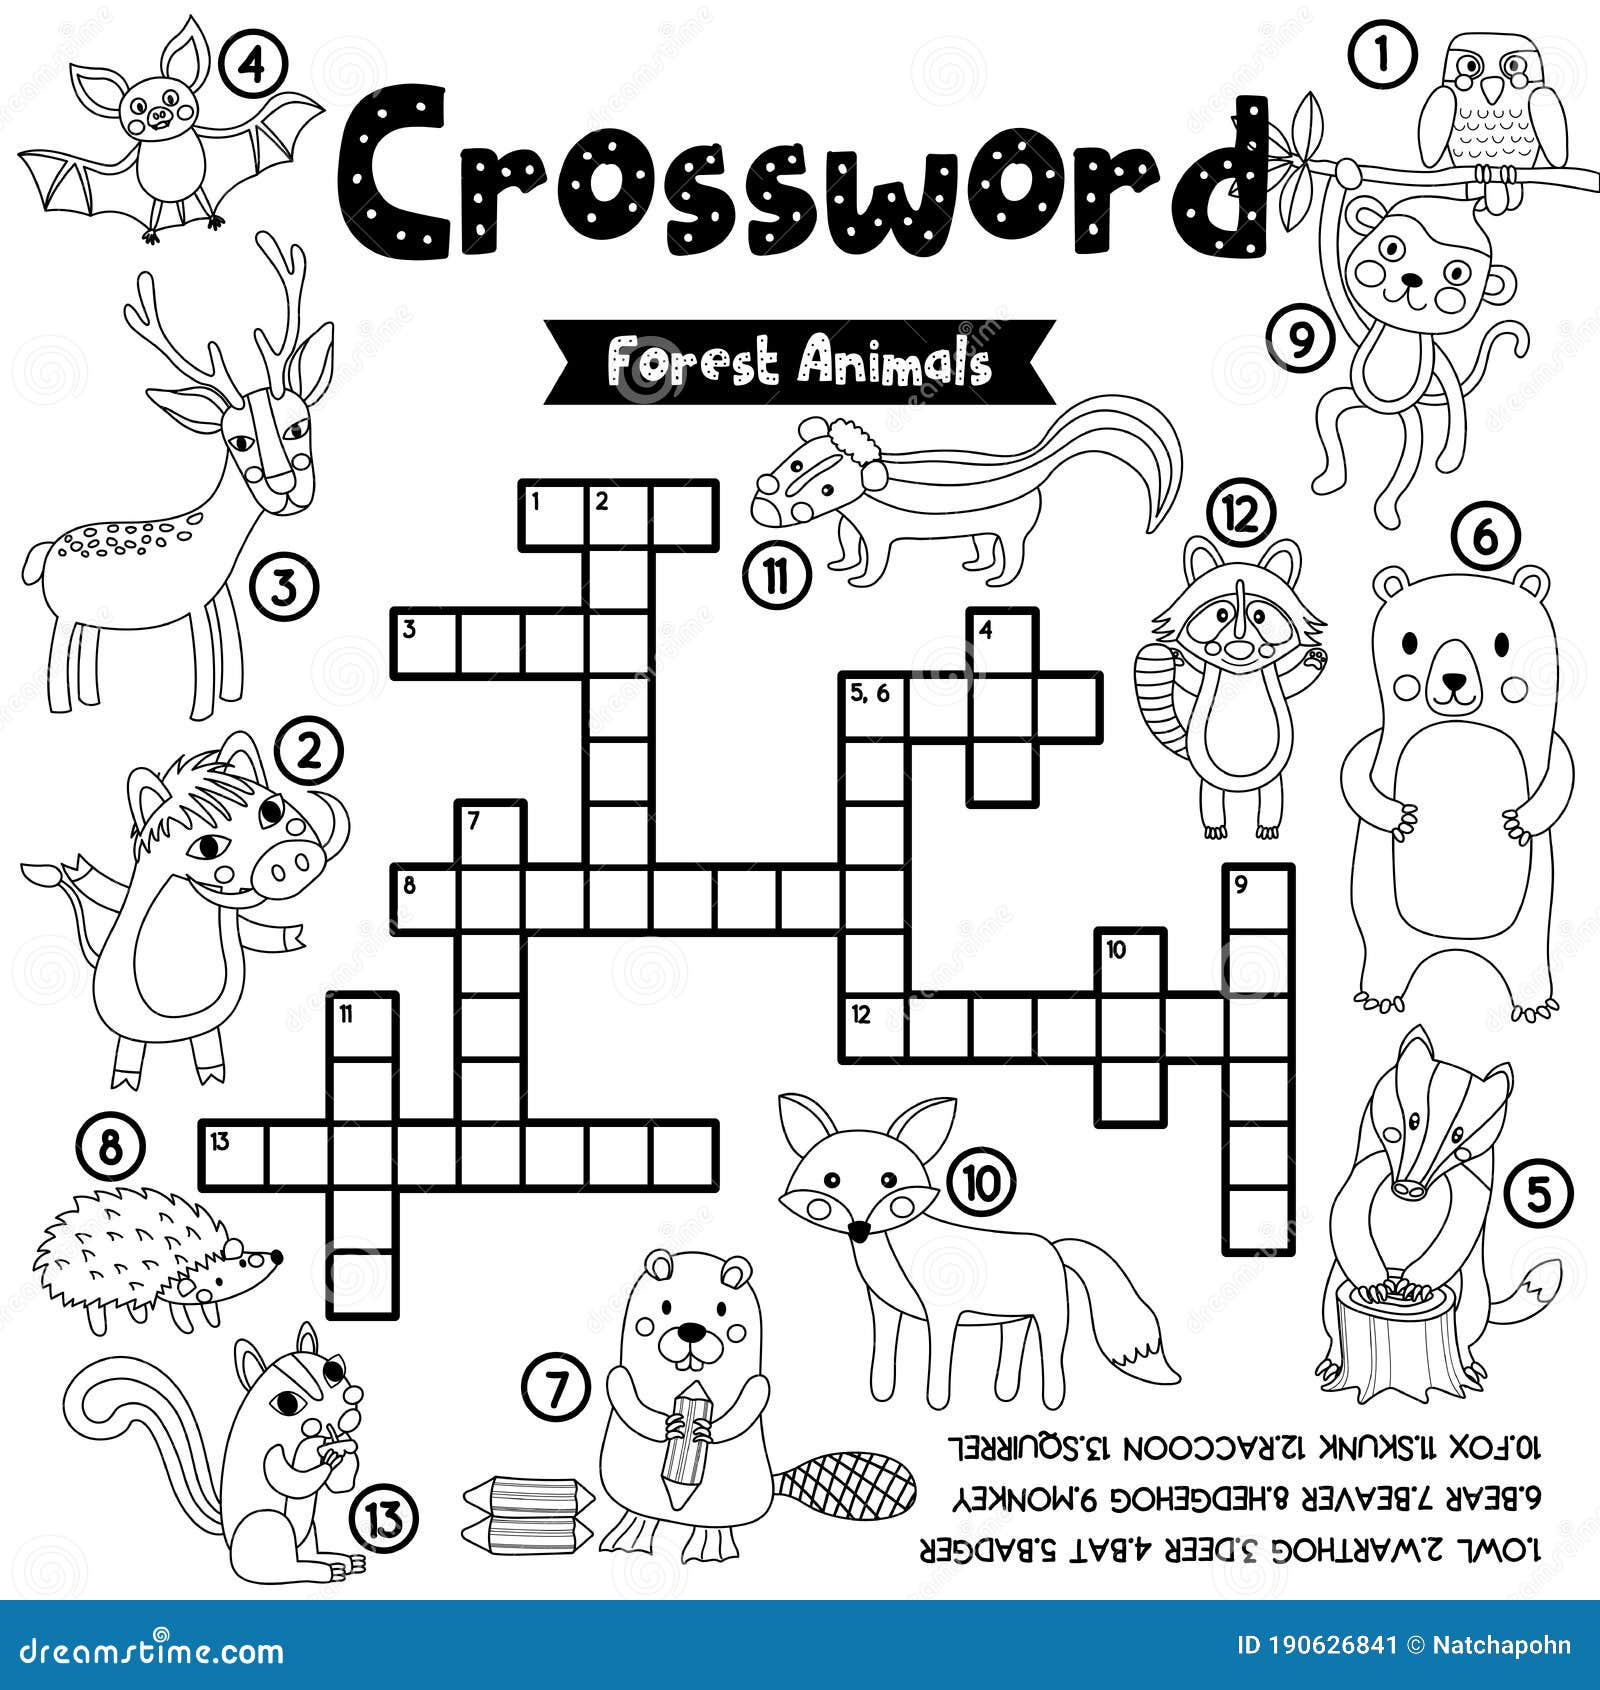 Crossword puzzle forest animals coloring version stock vector